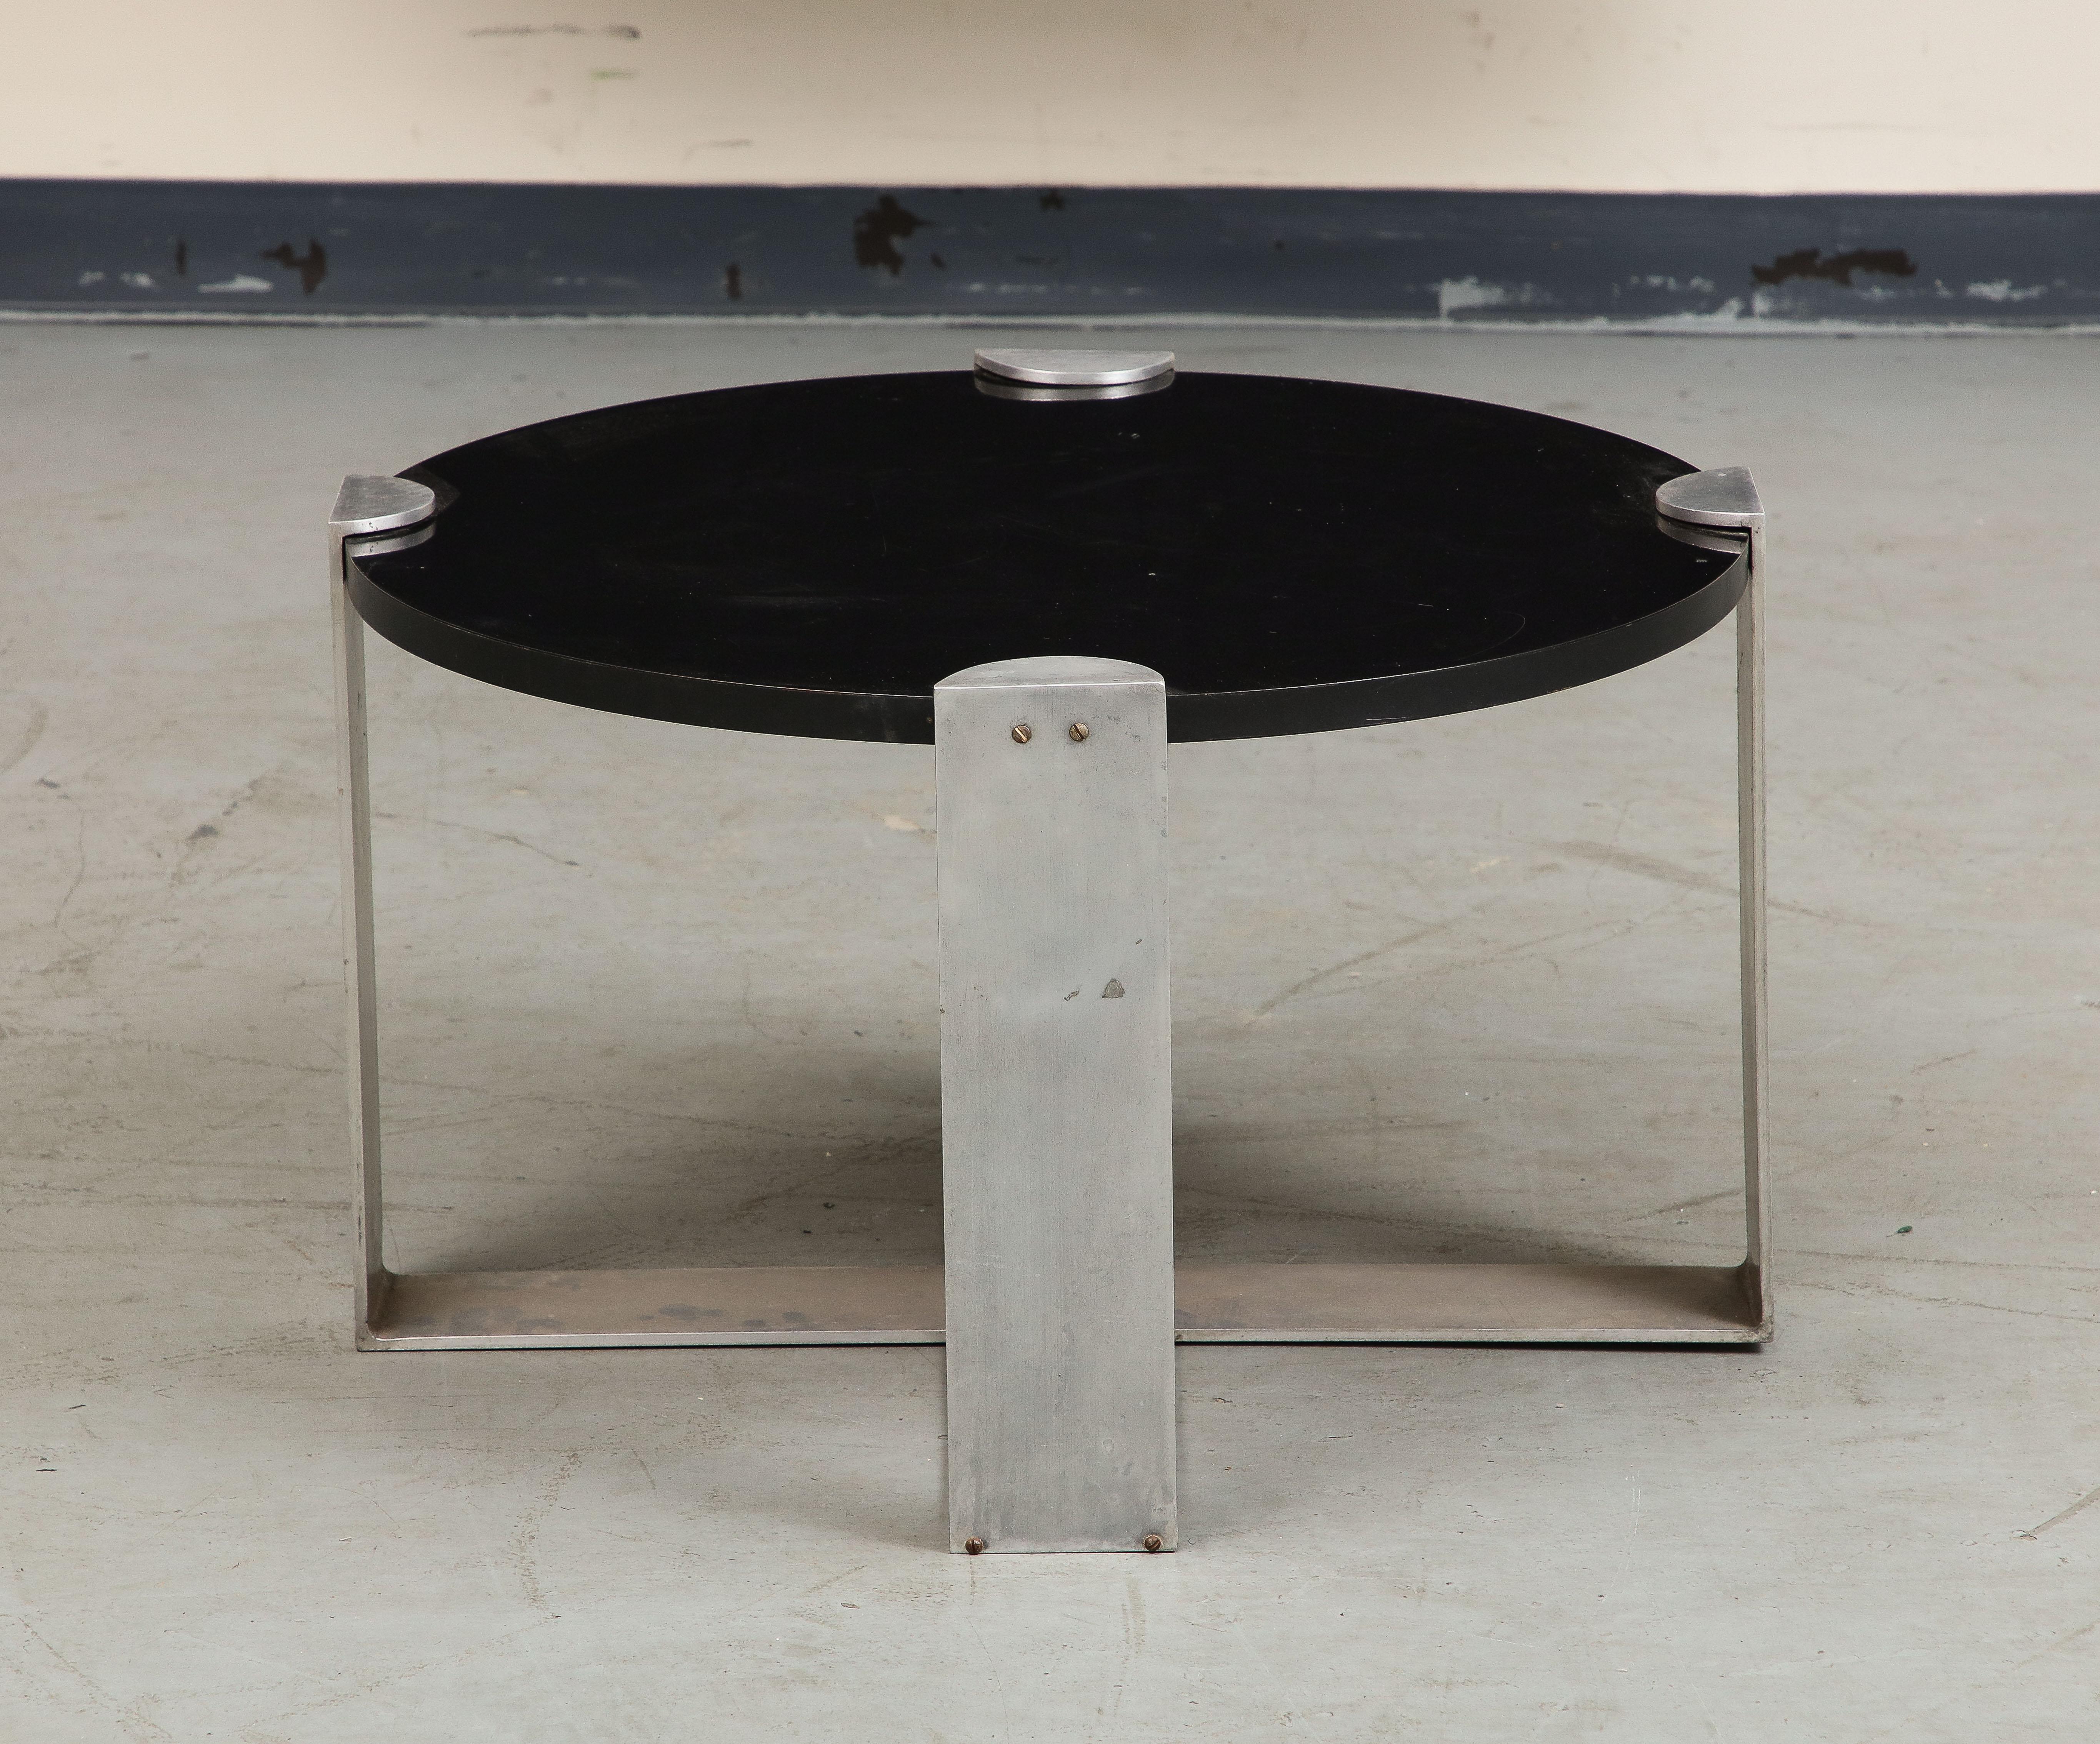 Midcentury coffee table with polished steel base and black wood top, circa 1950.